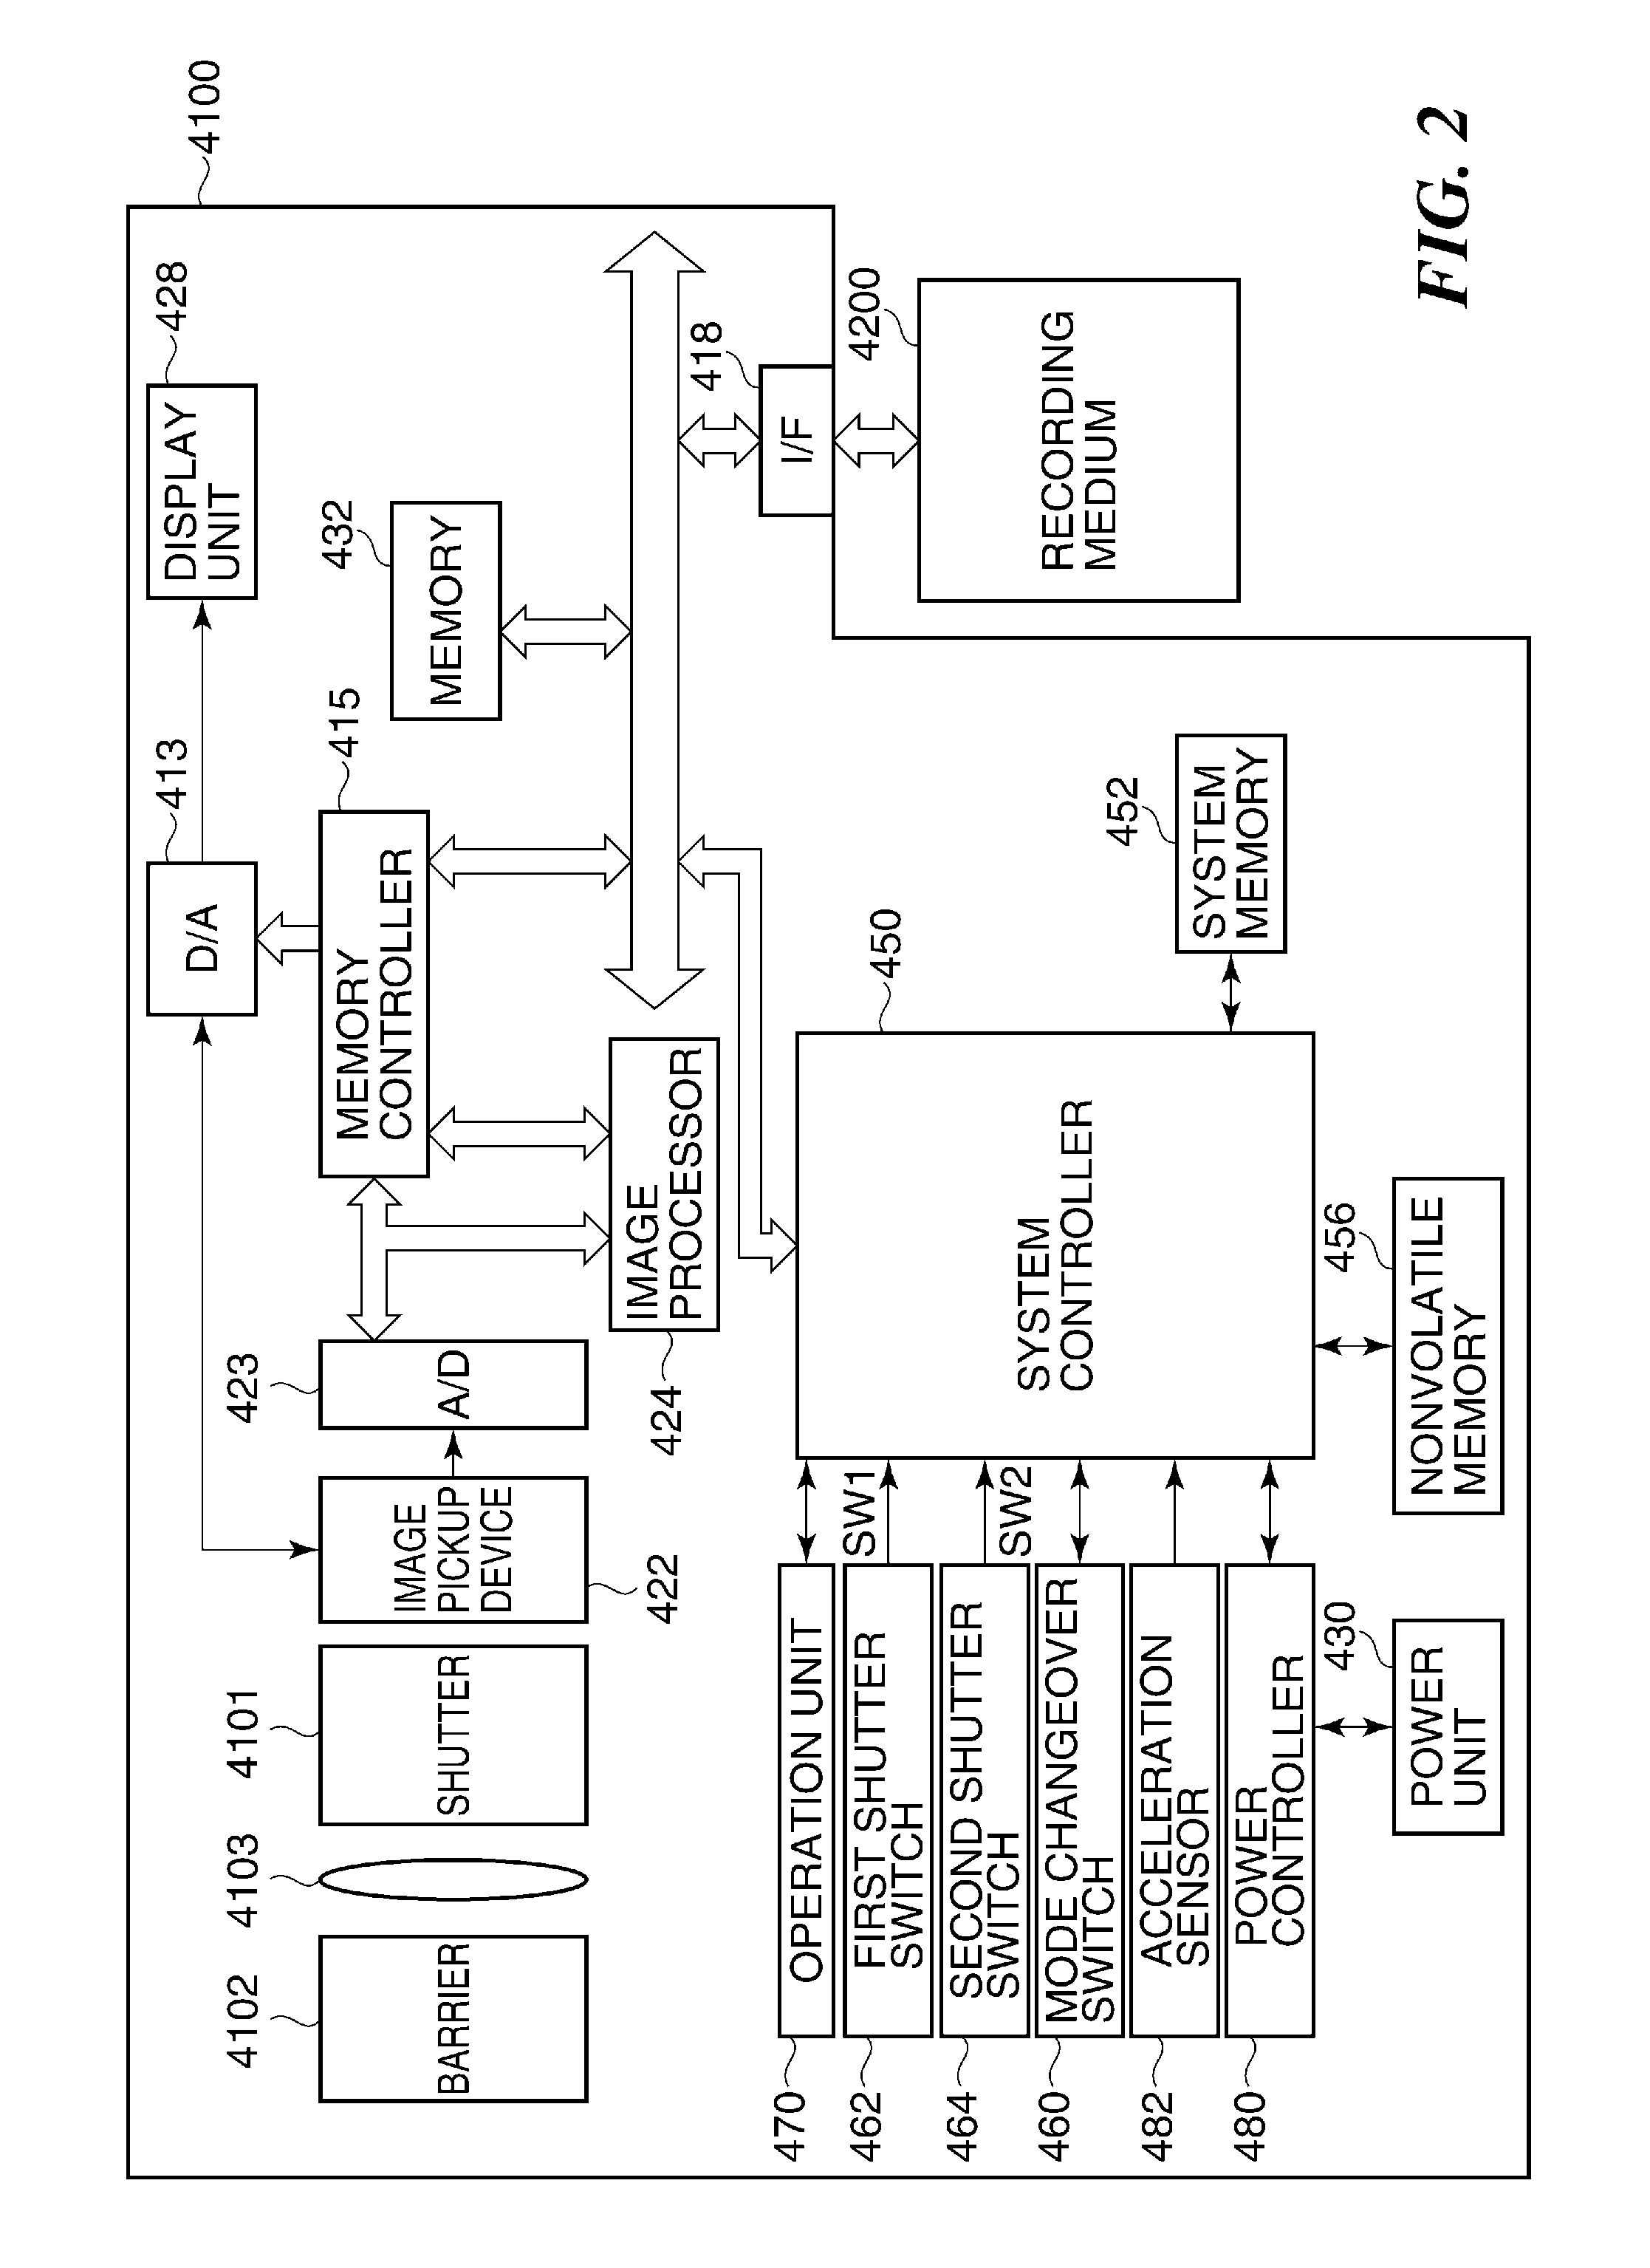 Image processing apparatus and method capable of suppressing image quality deterioration, and storage medium